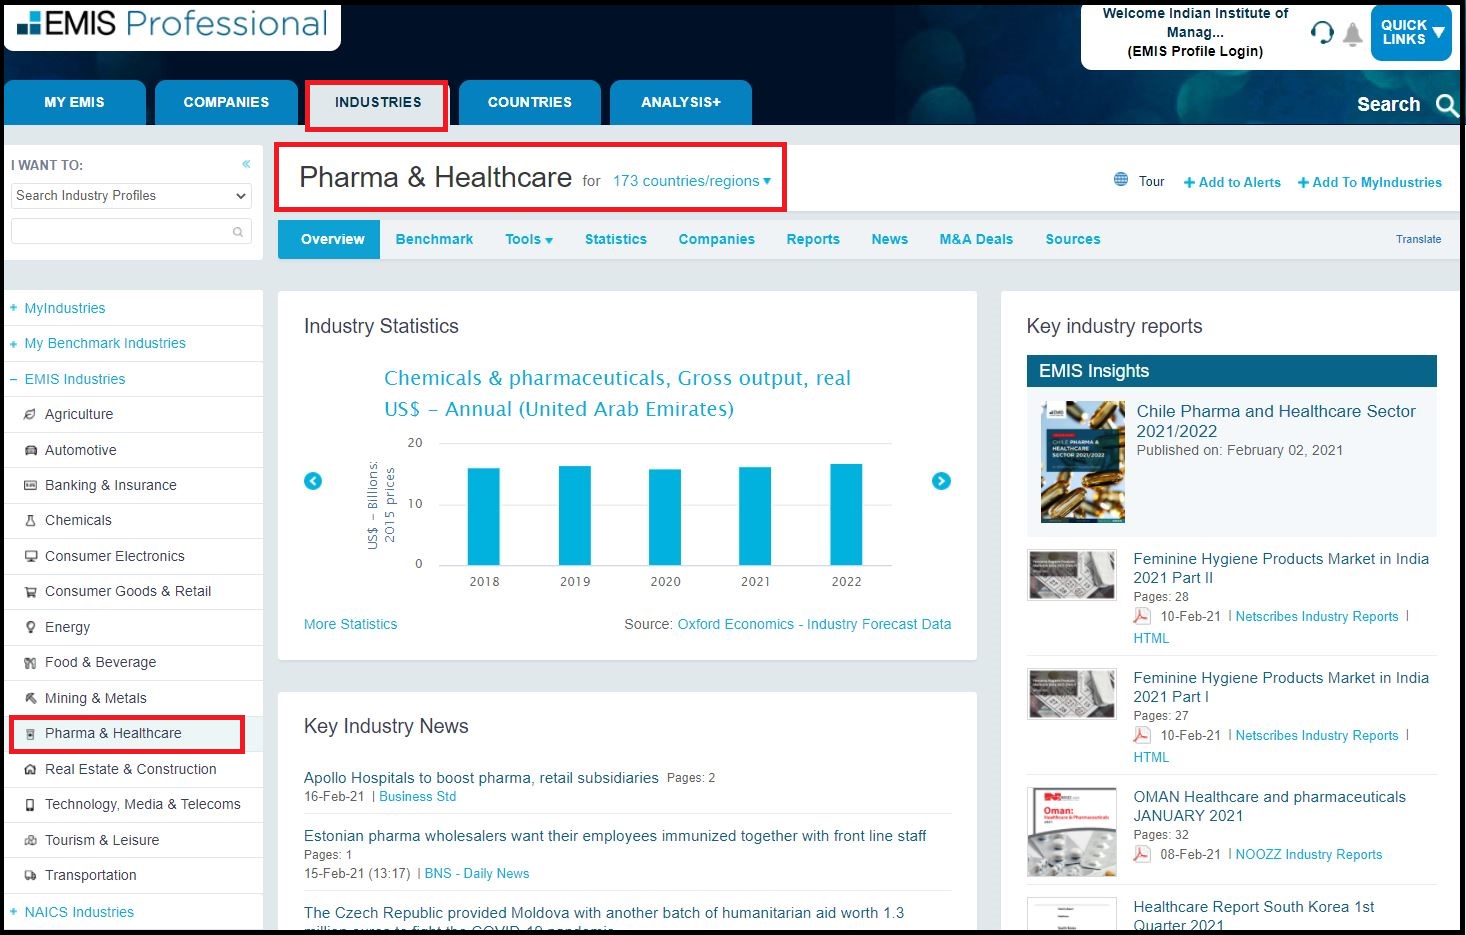 EMIS Intelligence (Professional) and Select Industry Analysis then Click on Pharma & Healthcare